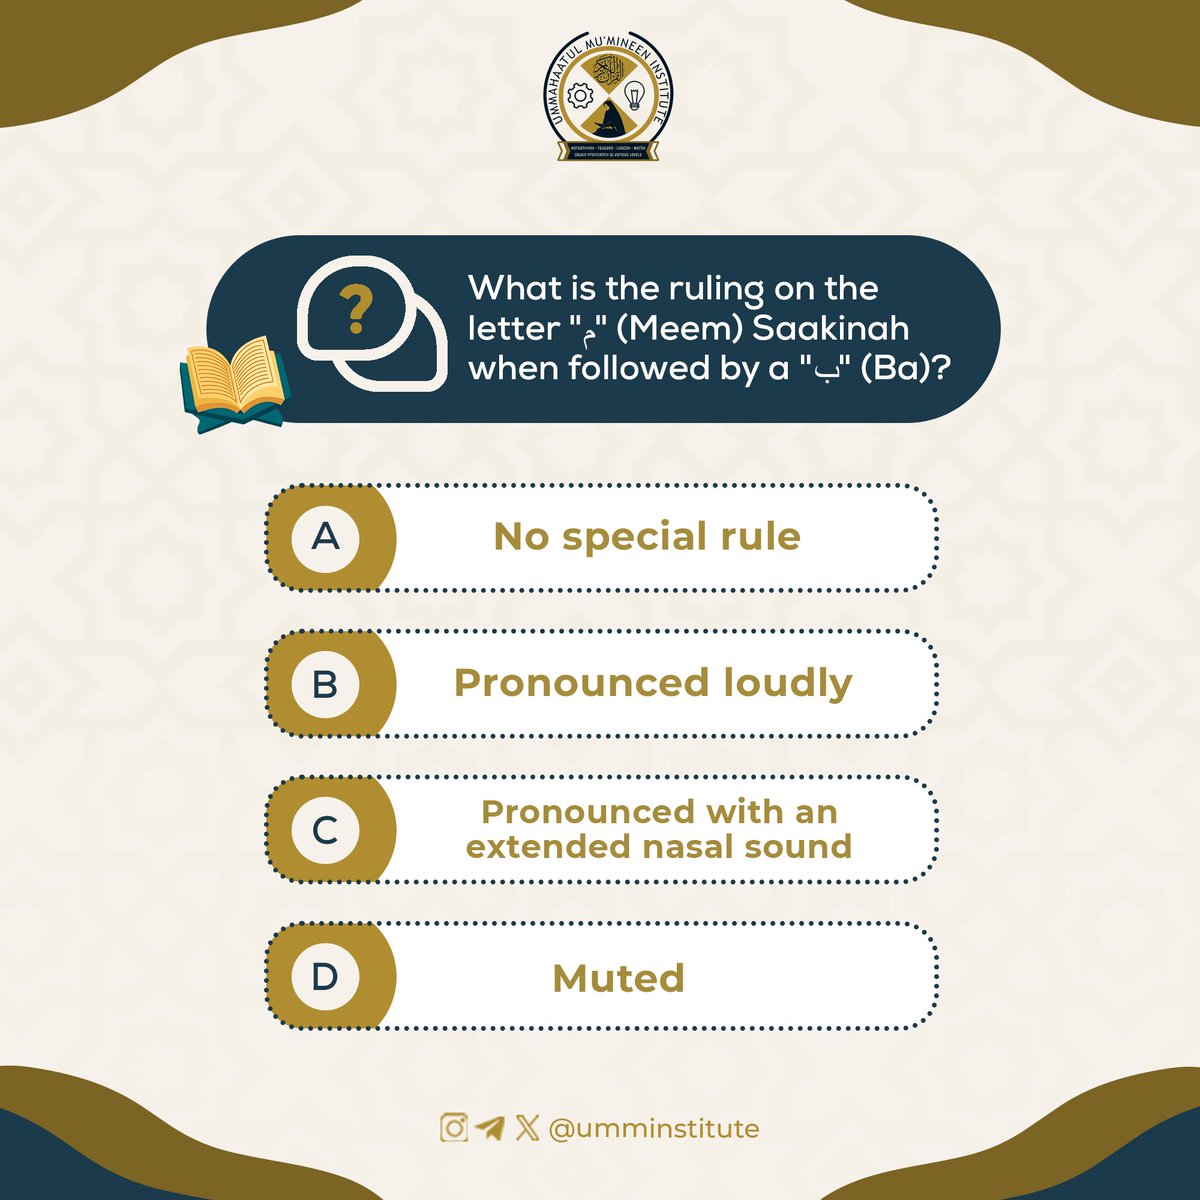 🌟 Quiz time! Test your knowledge about the Quran and share your answers in the comments below! Let's learn something new together! Wanna learn more about the Quran? DM us for more details umminstitute.com/contact-us/ #tajweed #onilnequran #Quran #quranclass #UMMI #QuranQuiz